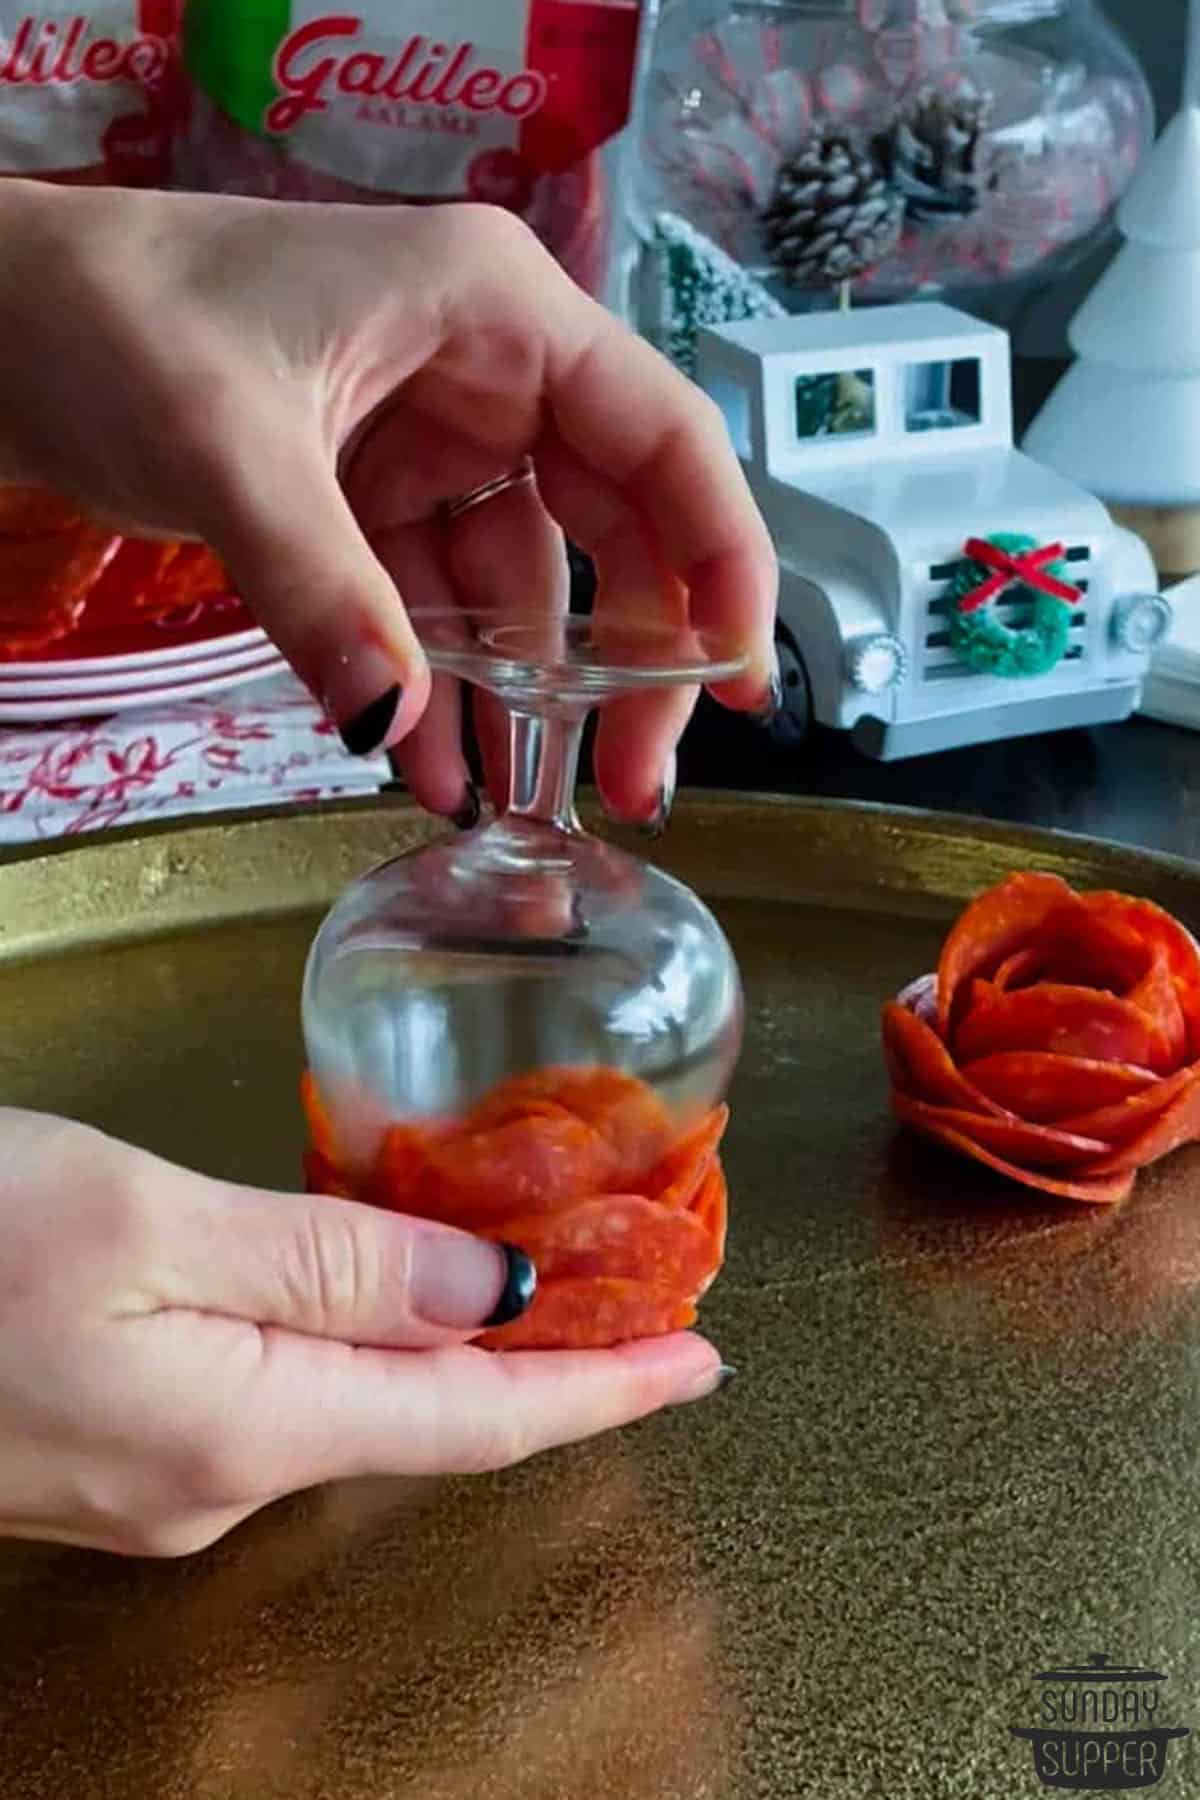 flipping the pepperoni flower after removing the paper towel